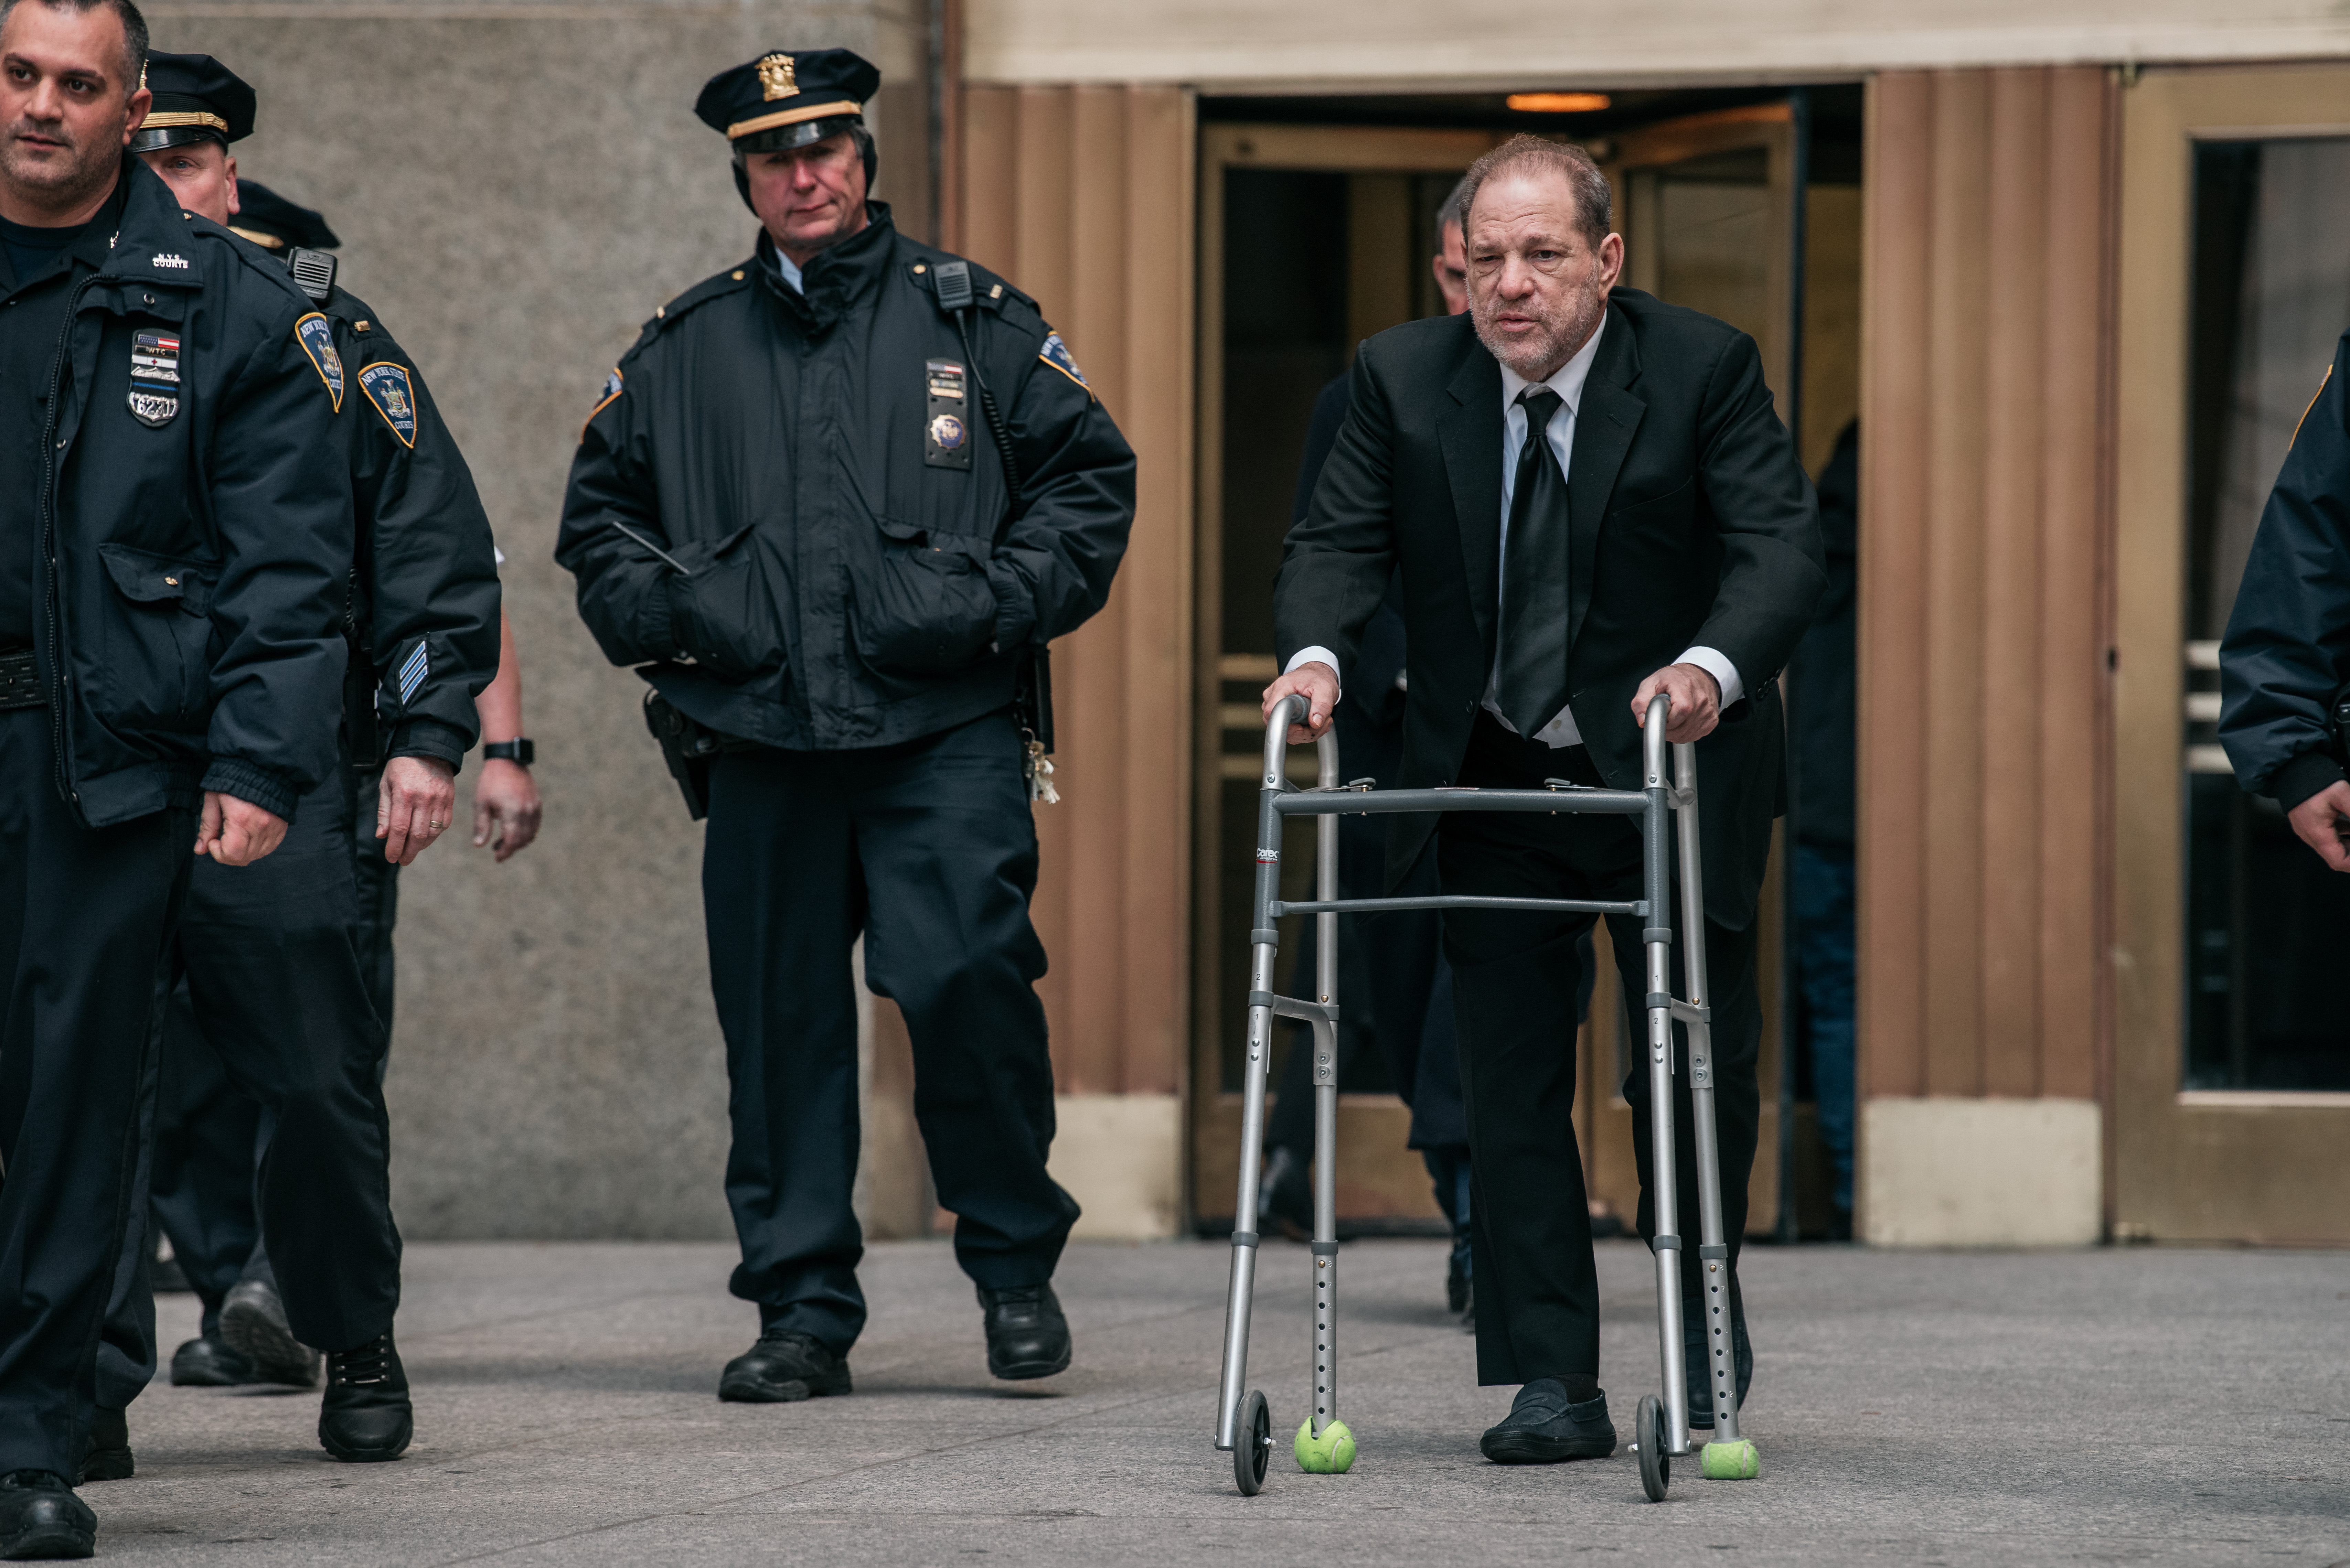 Harvey Weinstein leaves New York City Criminal Court on January 16, 2020 in New York City. Weinstein, a movie producer whose alleged sexual misconduct helped spark the #MeToo movement, pleaded not-guilty on five counts of rape and sexual assault against two unnamed women and faces a possible life sentence in prison. (Photo by Scott Heins/Getty Images)